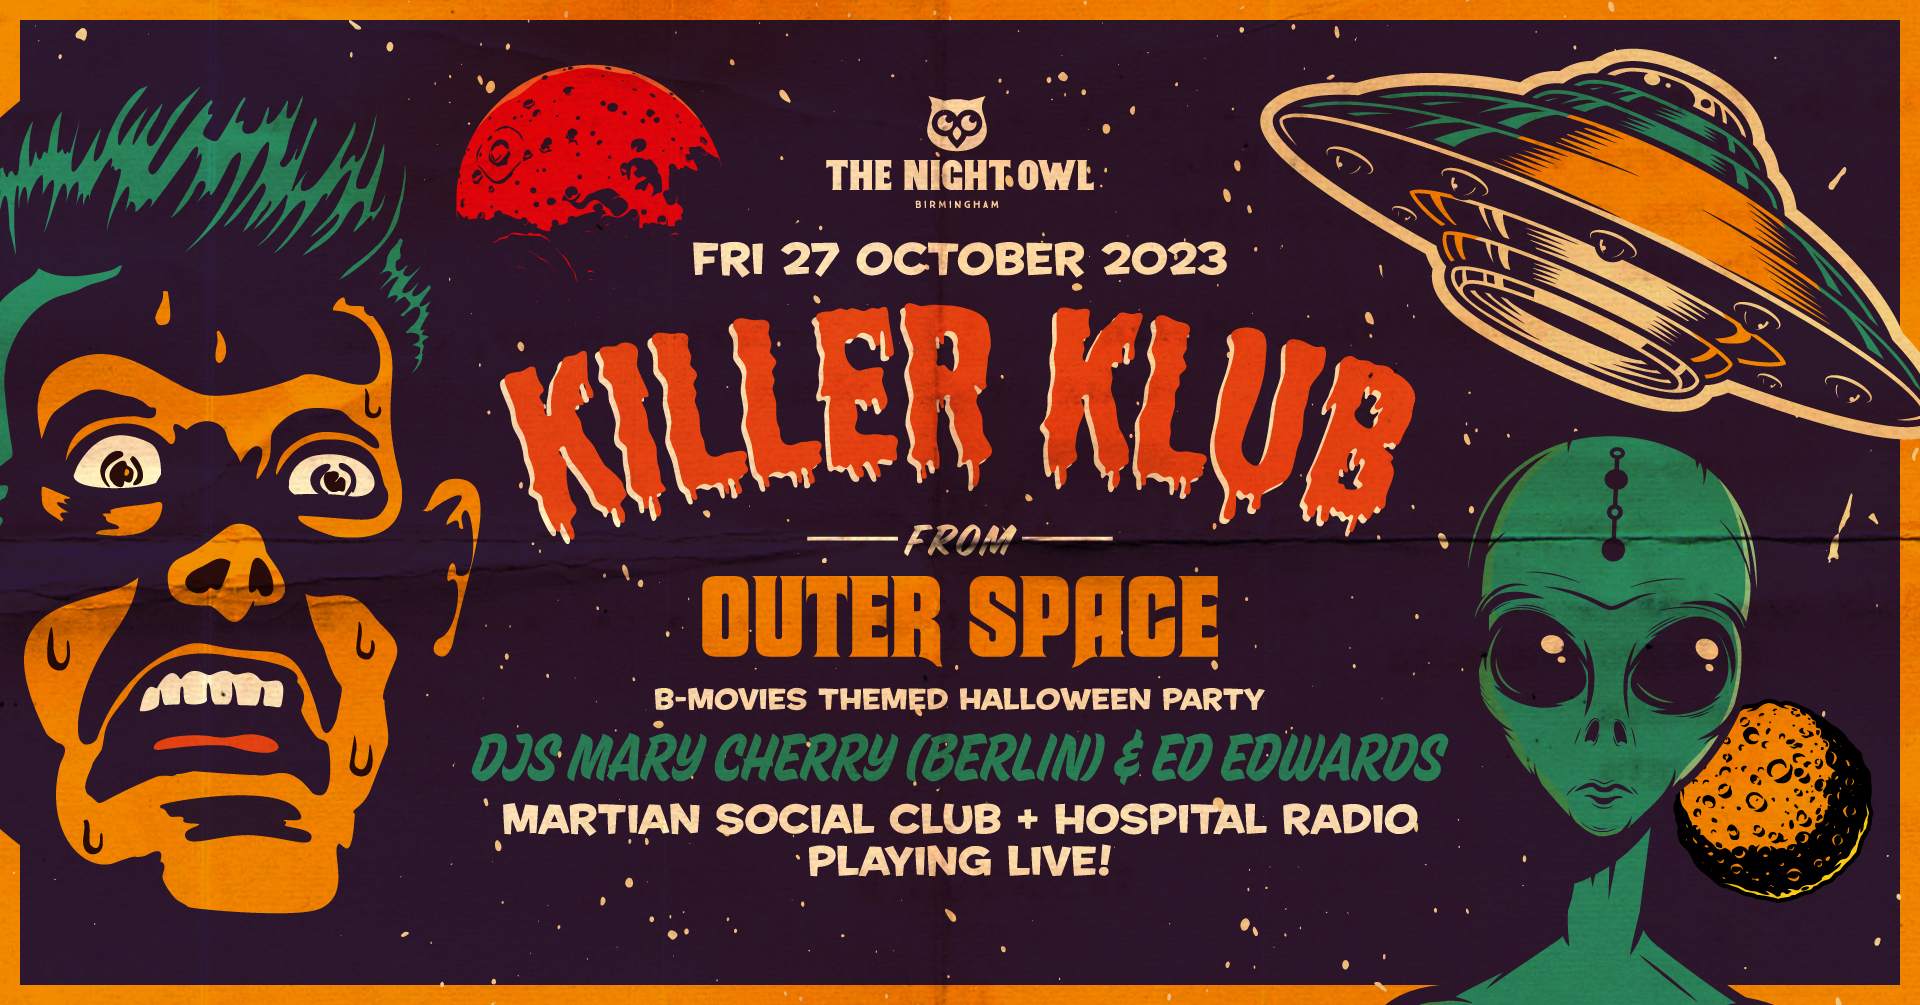 Killer Klub from Outer Space = A B Movies Themed Halloween Party - フライヤー表